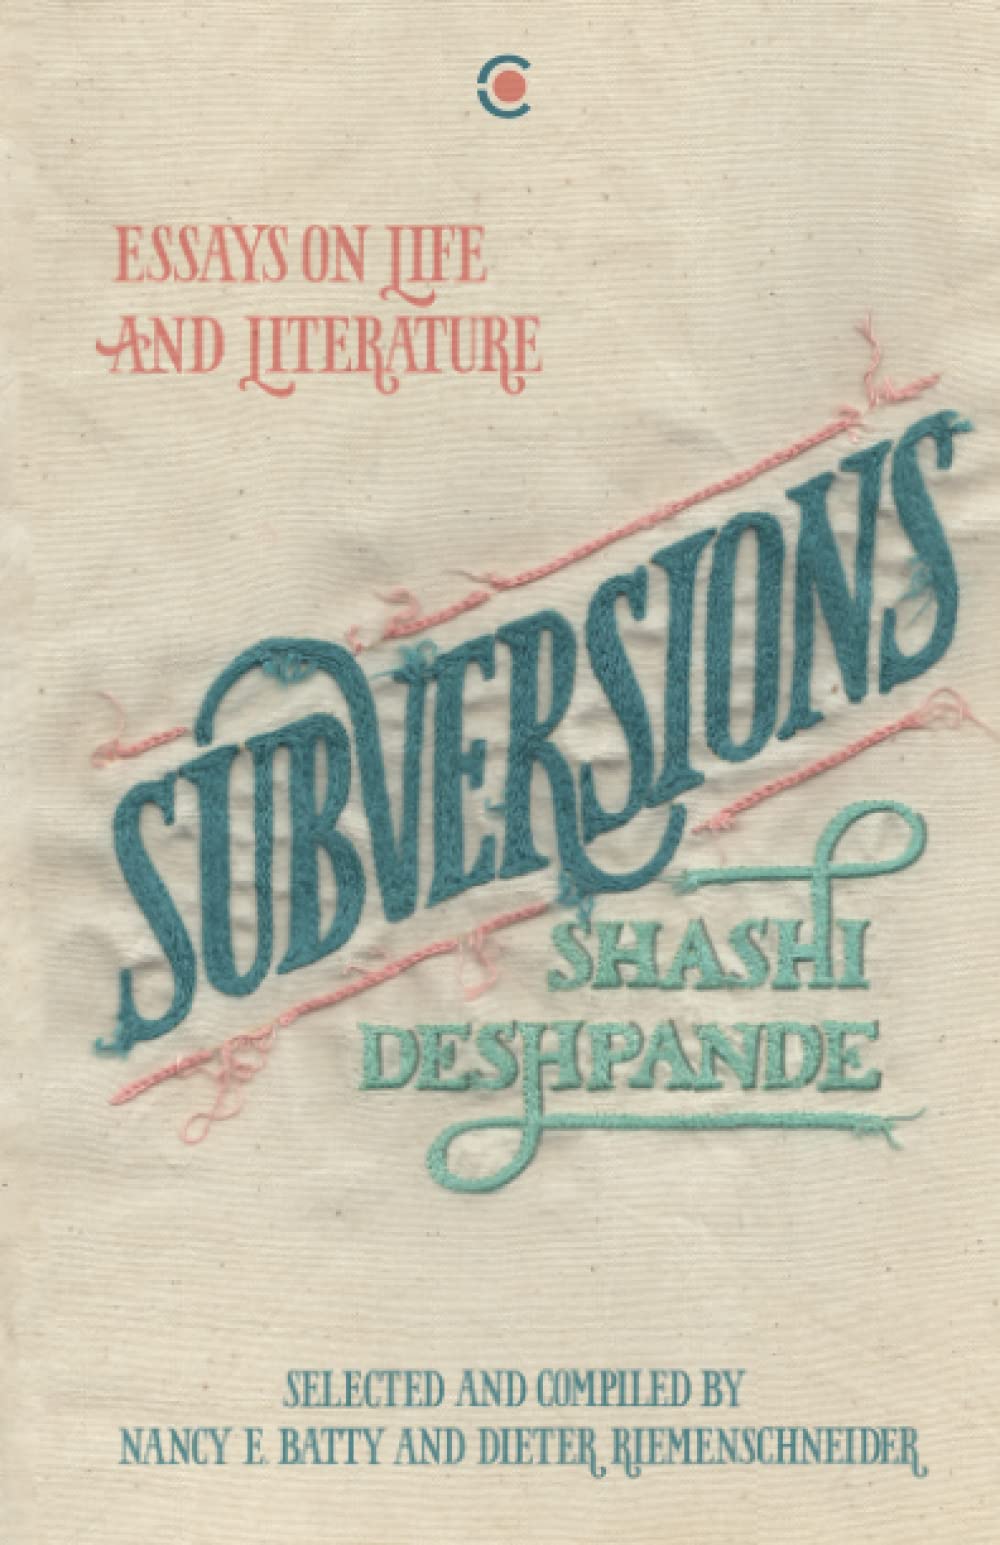 Subversions: Essays On Life And Literature